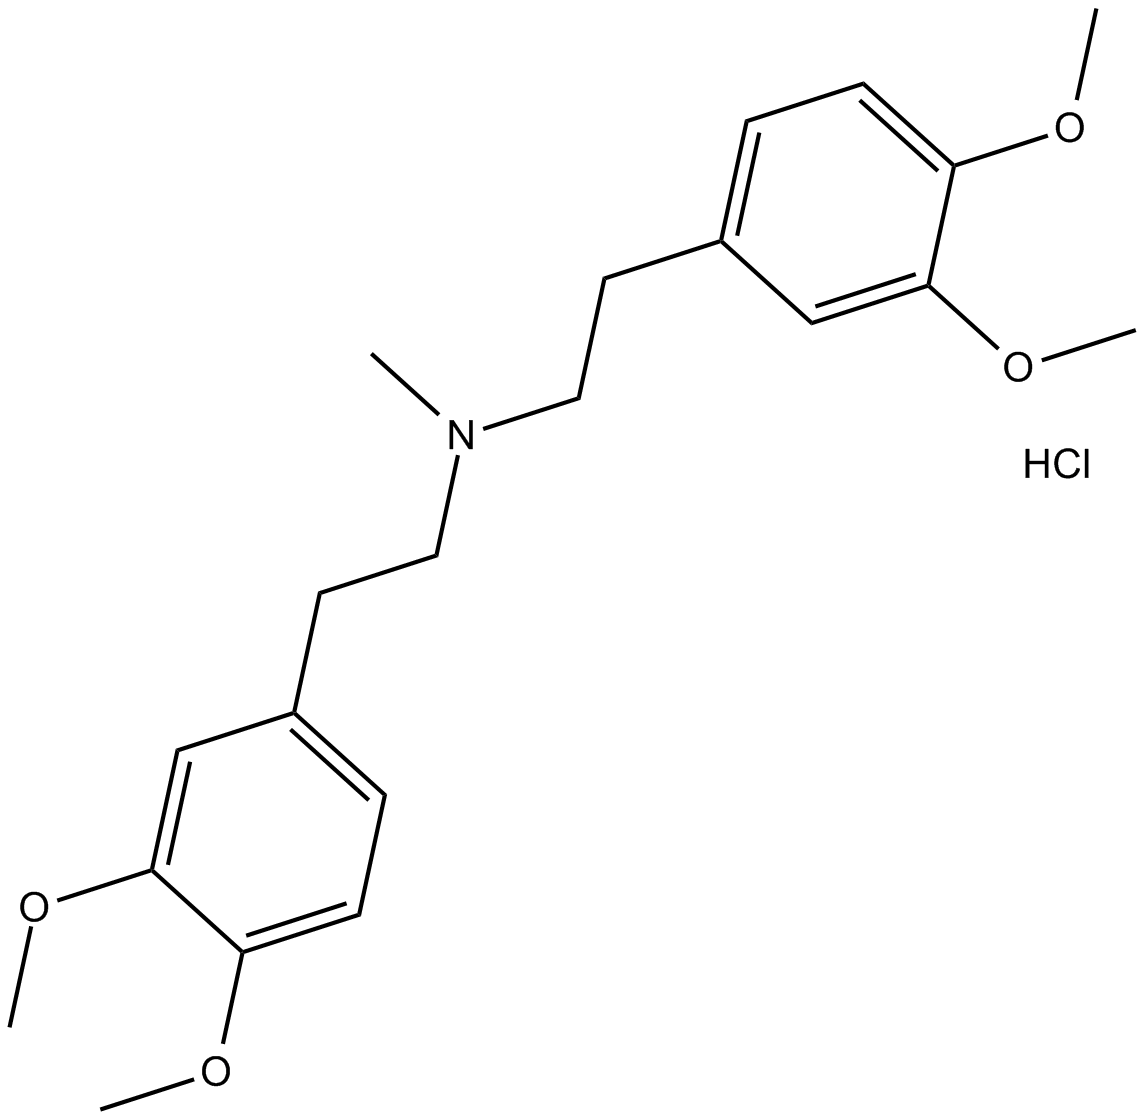 YS-035 hydrochloride  Chemical Structure